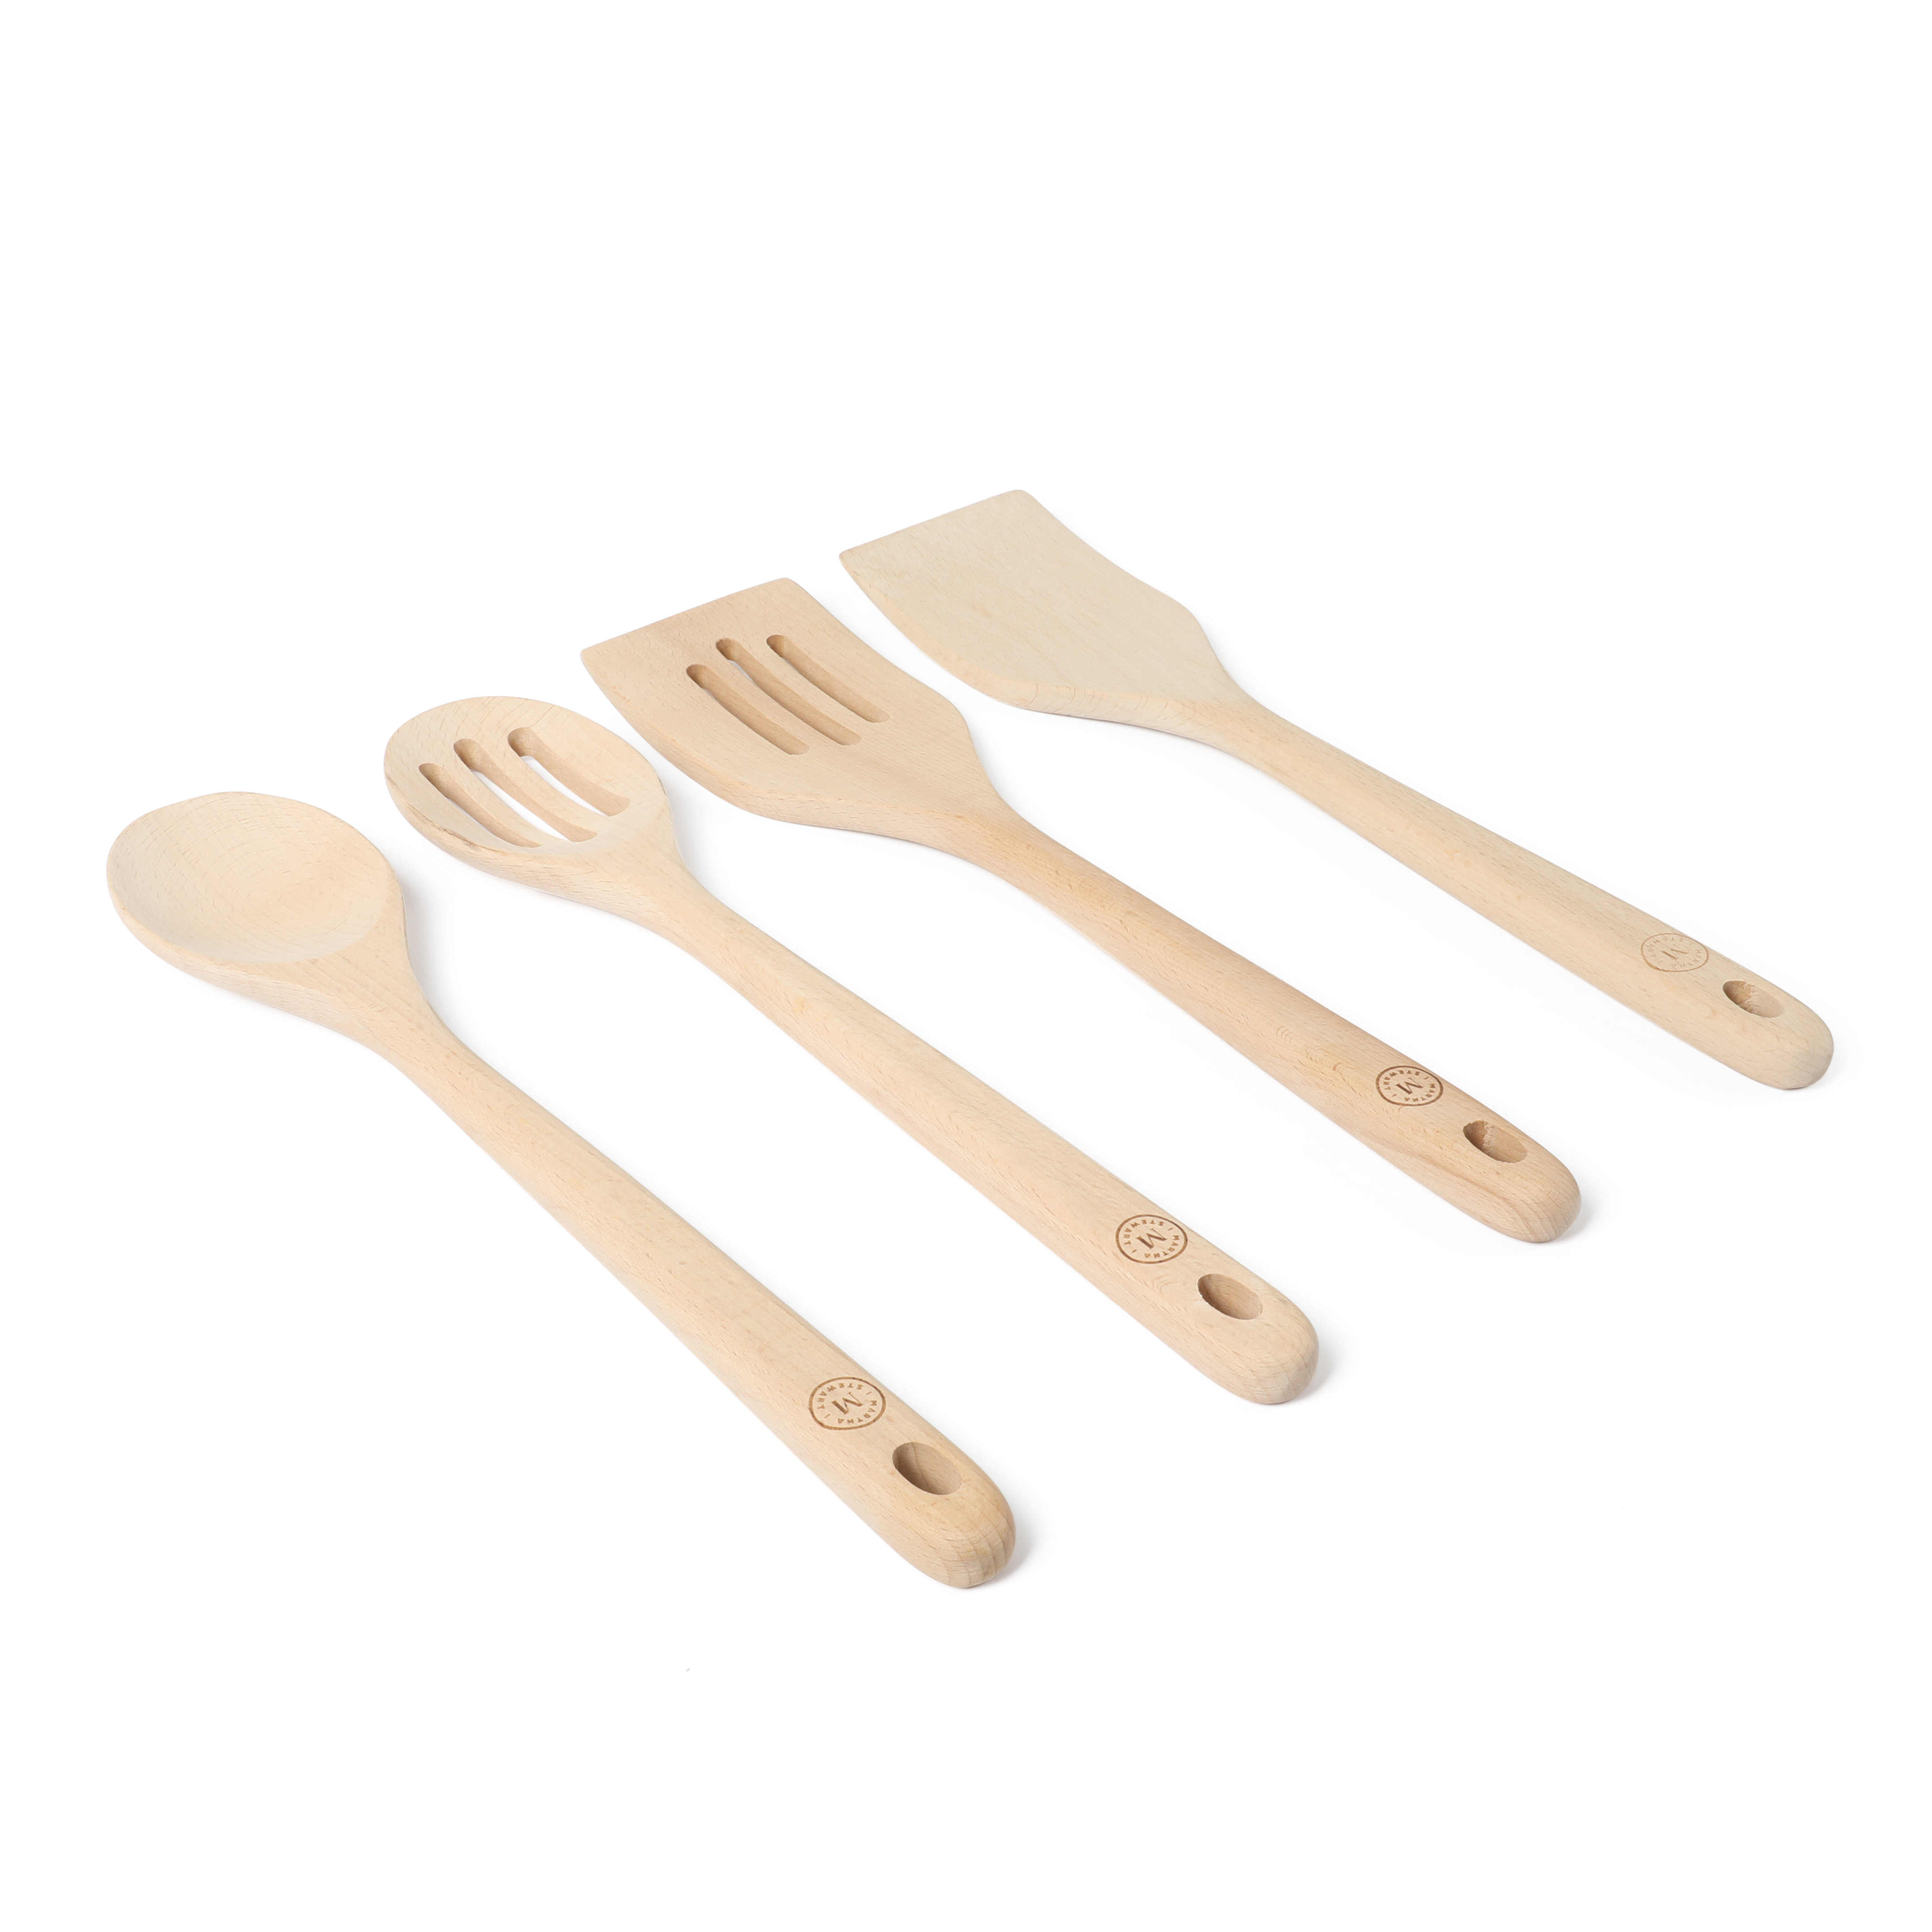 TAYANUC 5-Pieces Wooden Cooking Spoons Kitchen Utensil Set